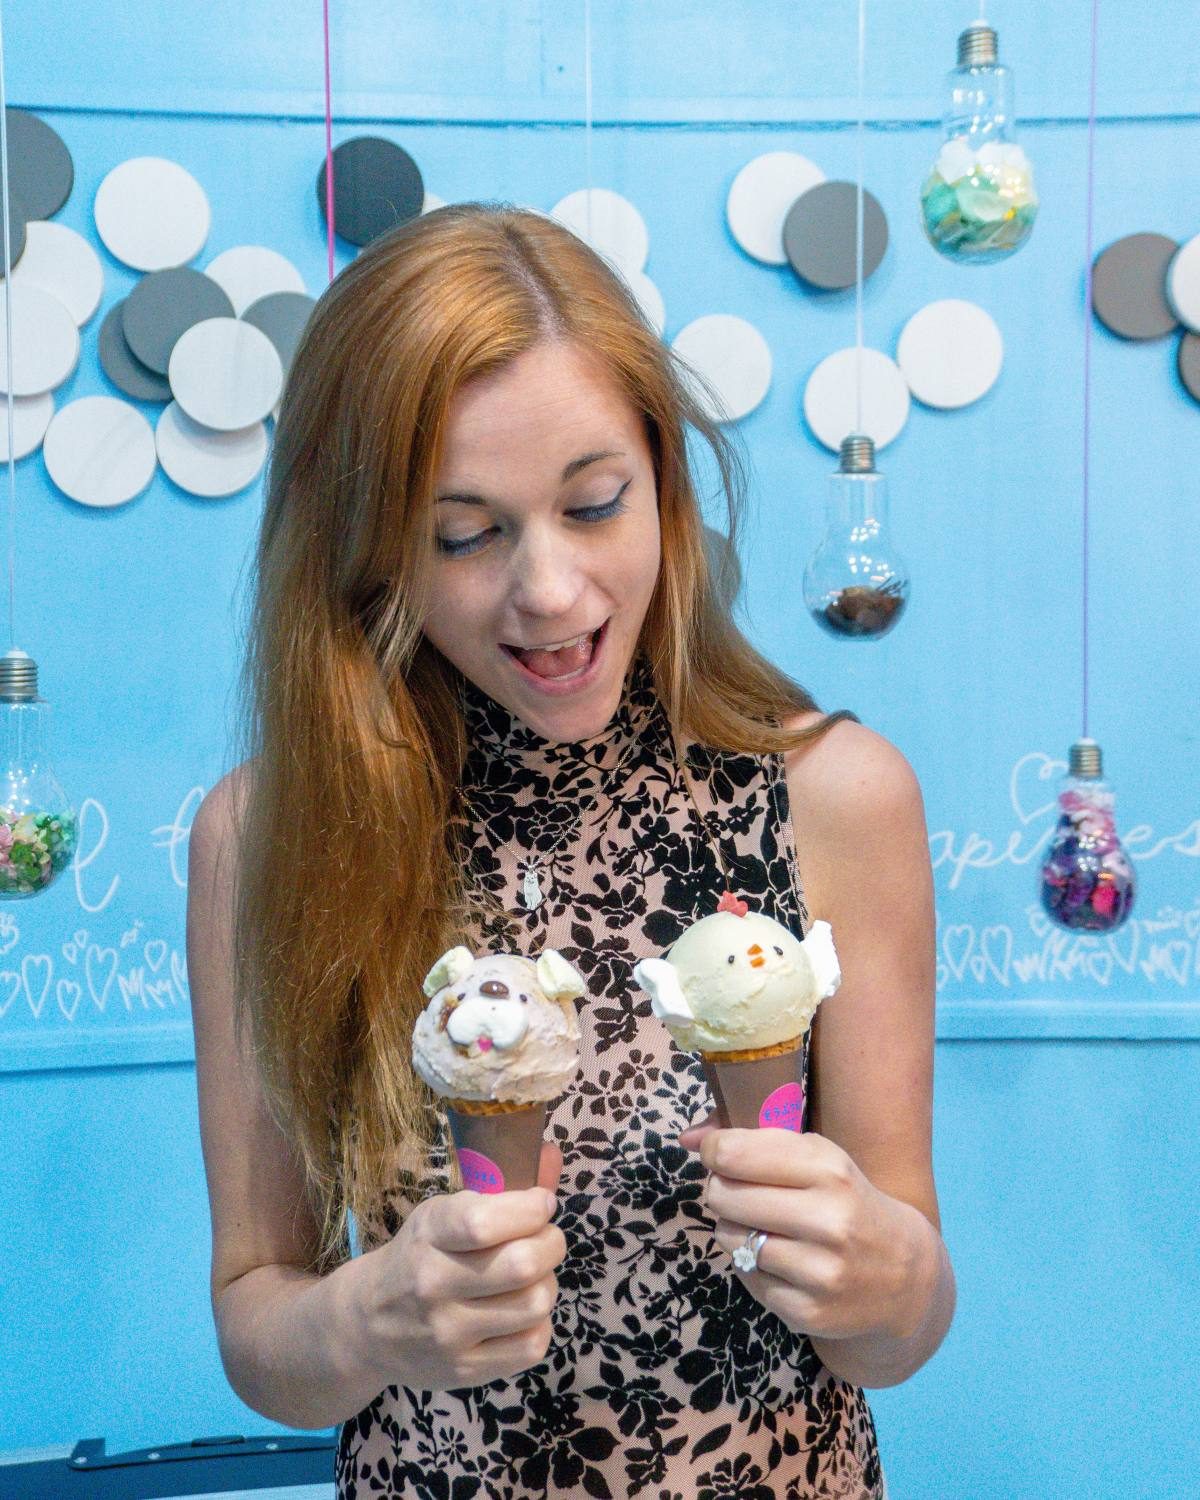 Woman delighted by adorable animal ice cream cones, a sweet treat in Tokyo.
